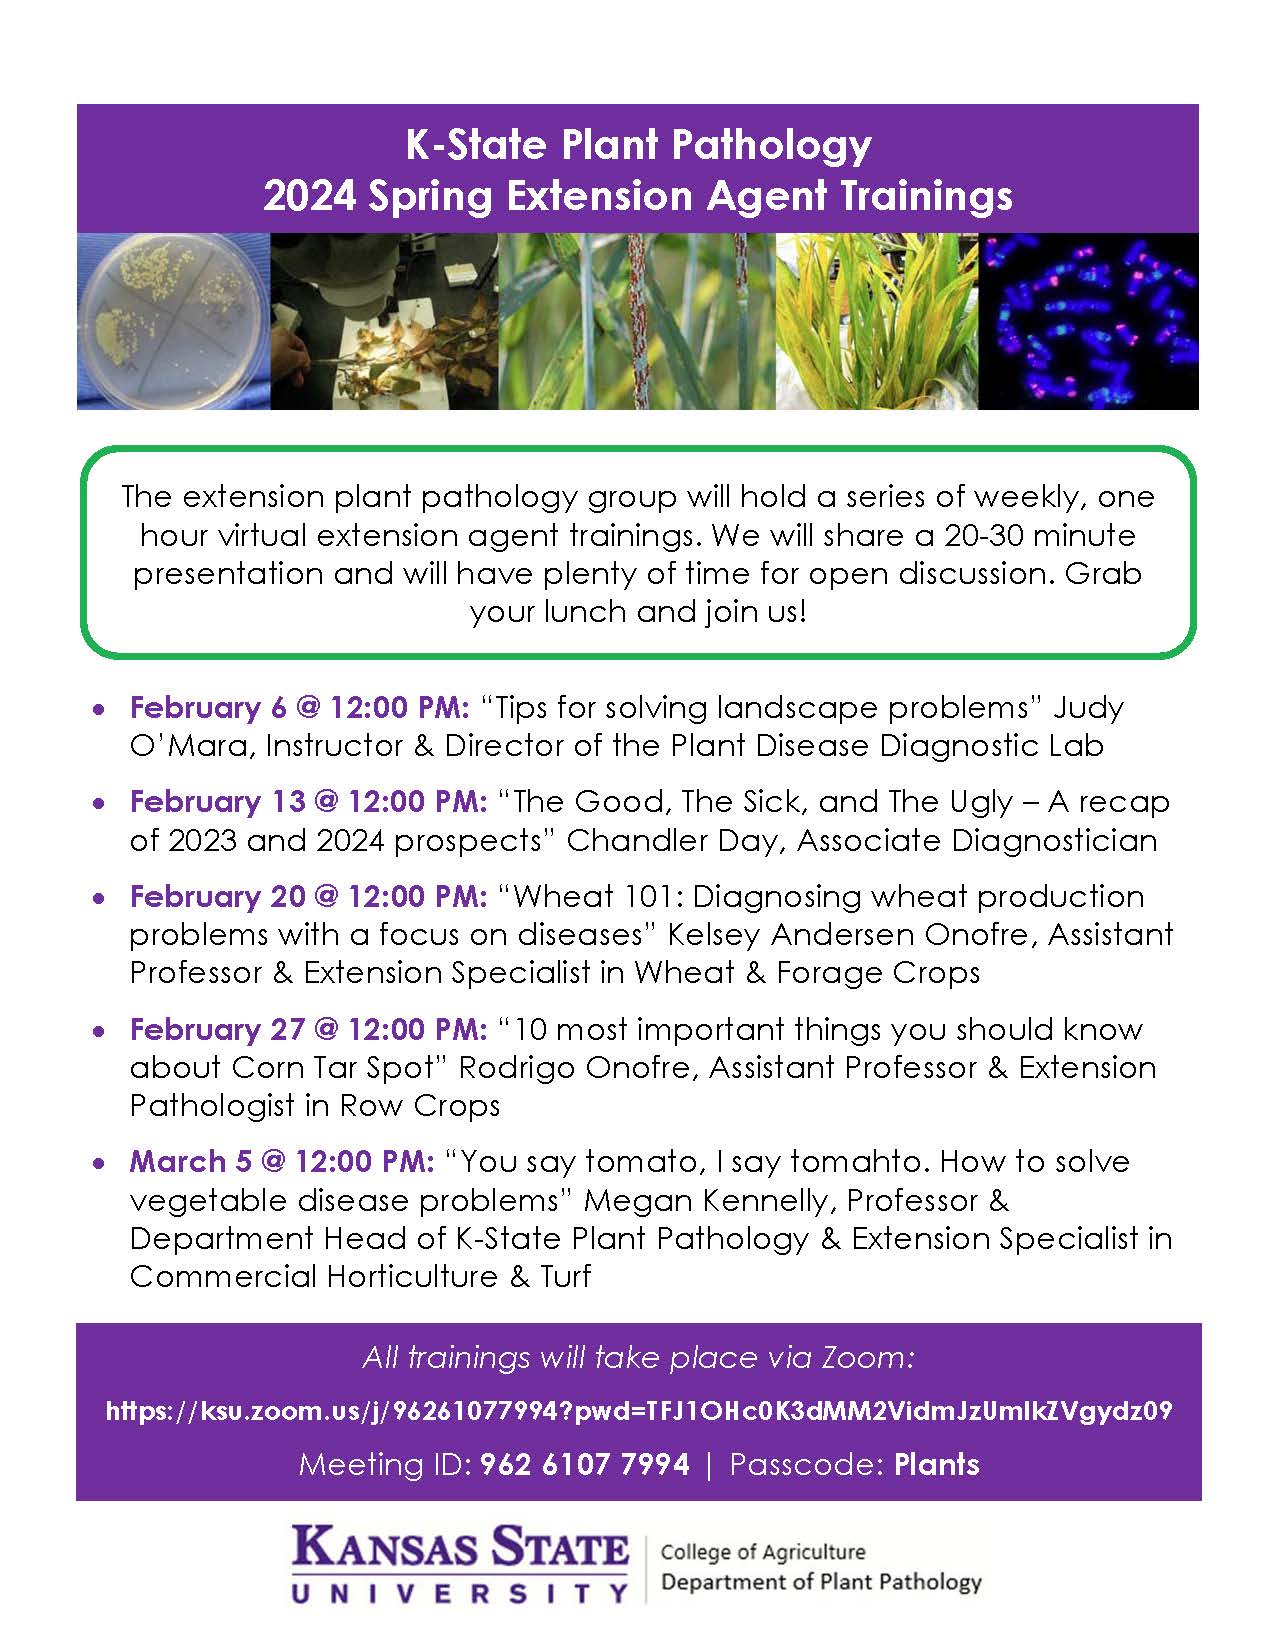 2024 Spring Extension Agent Trainings Flyer